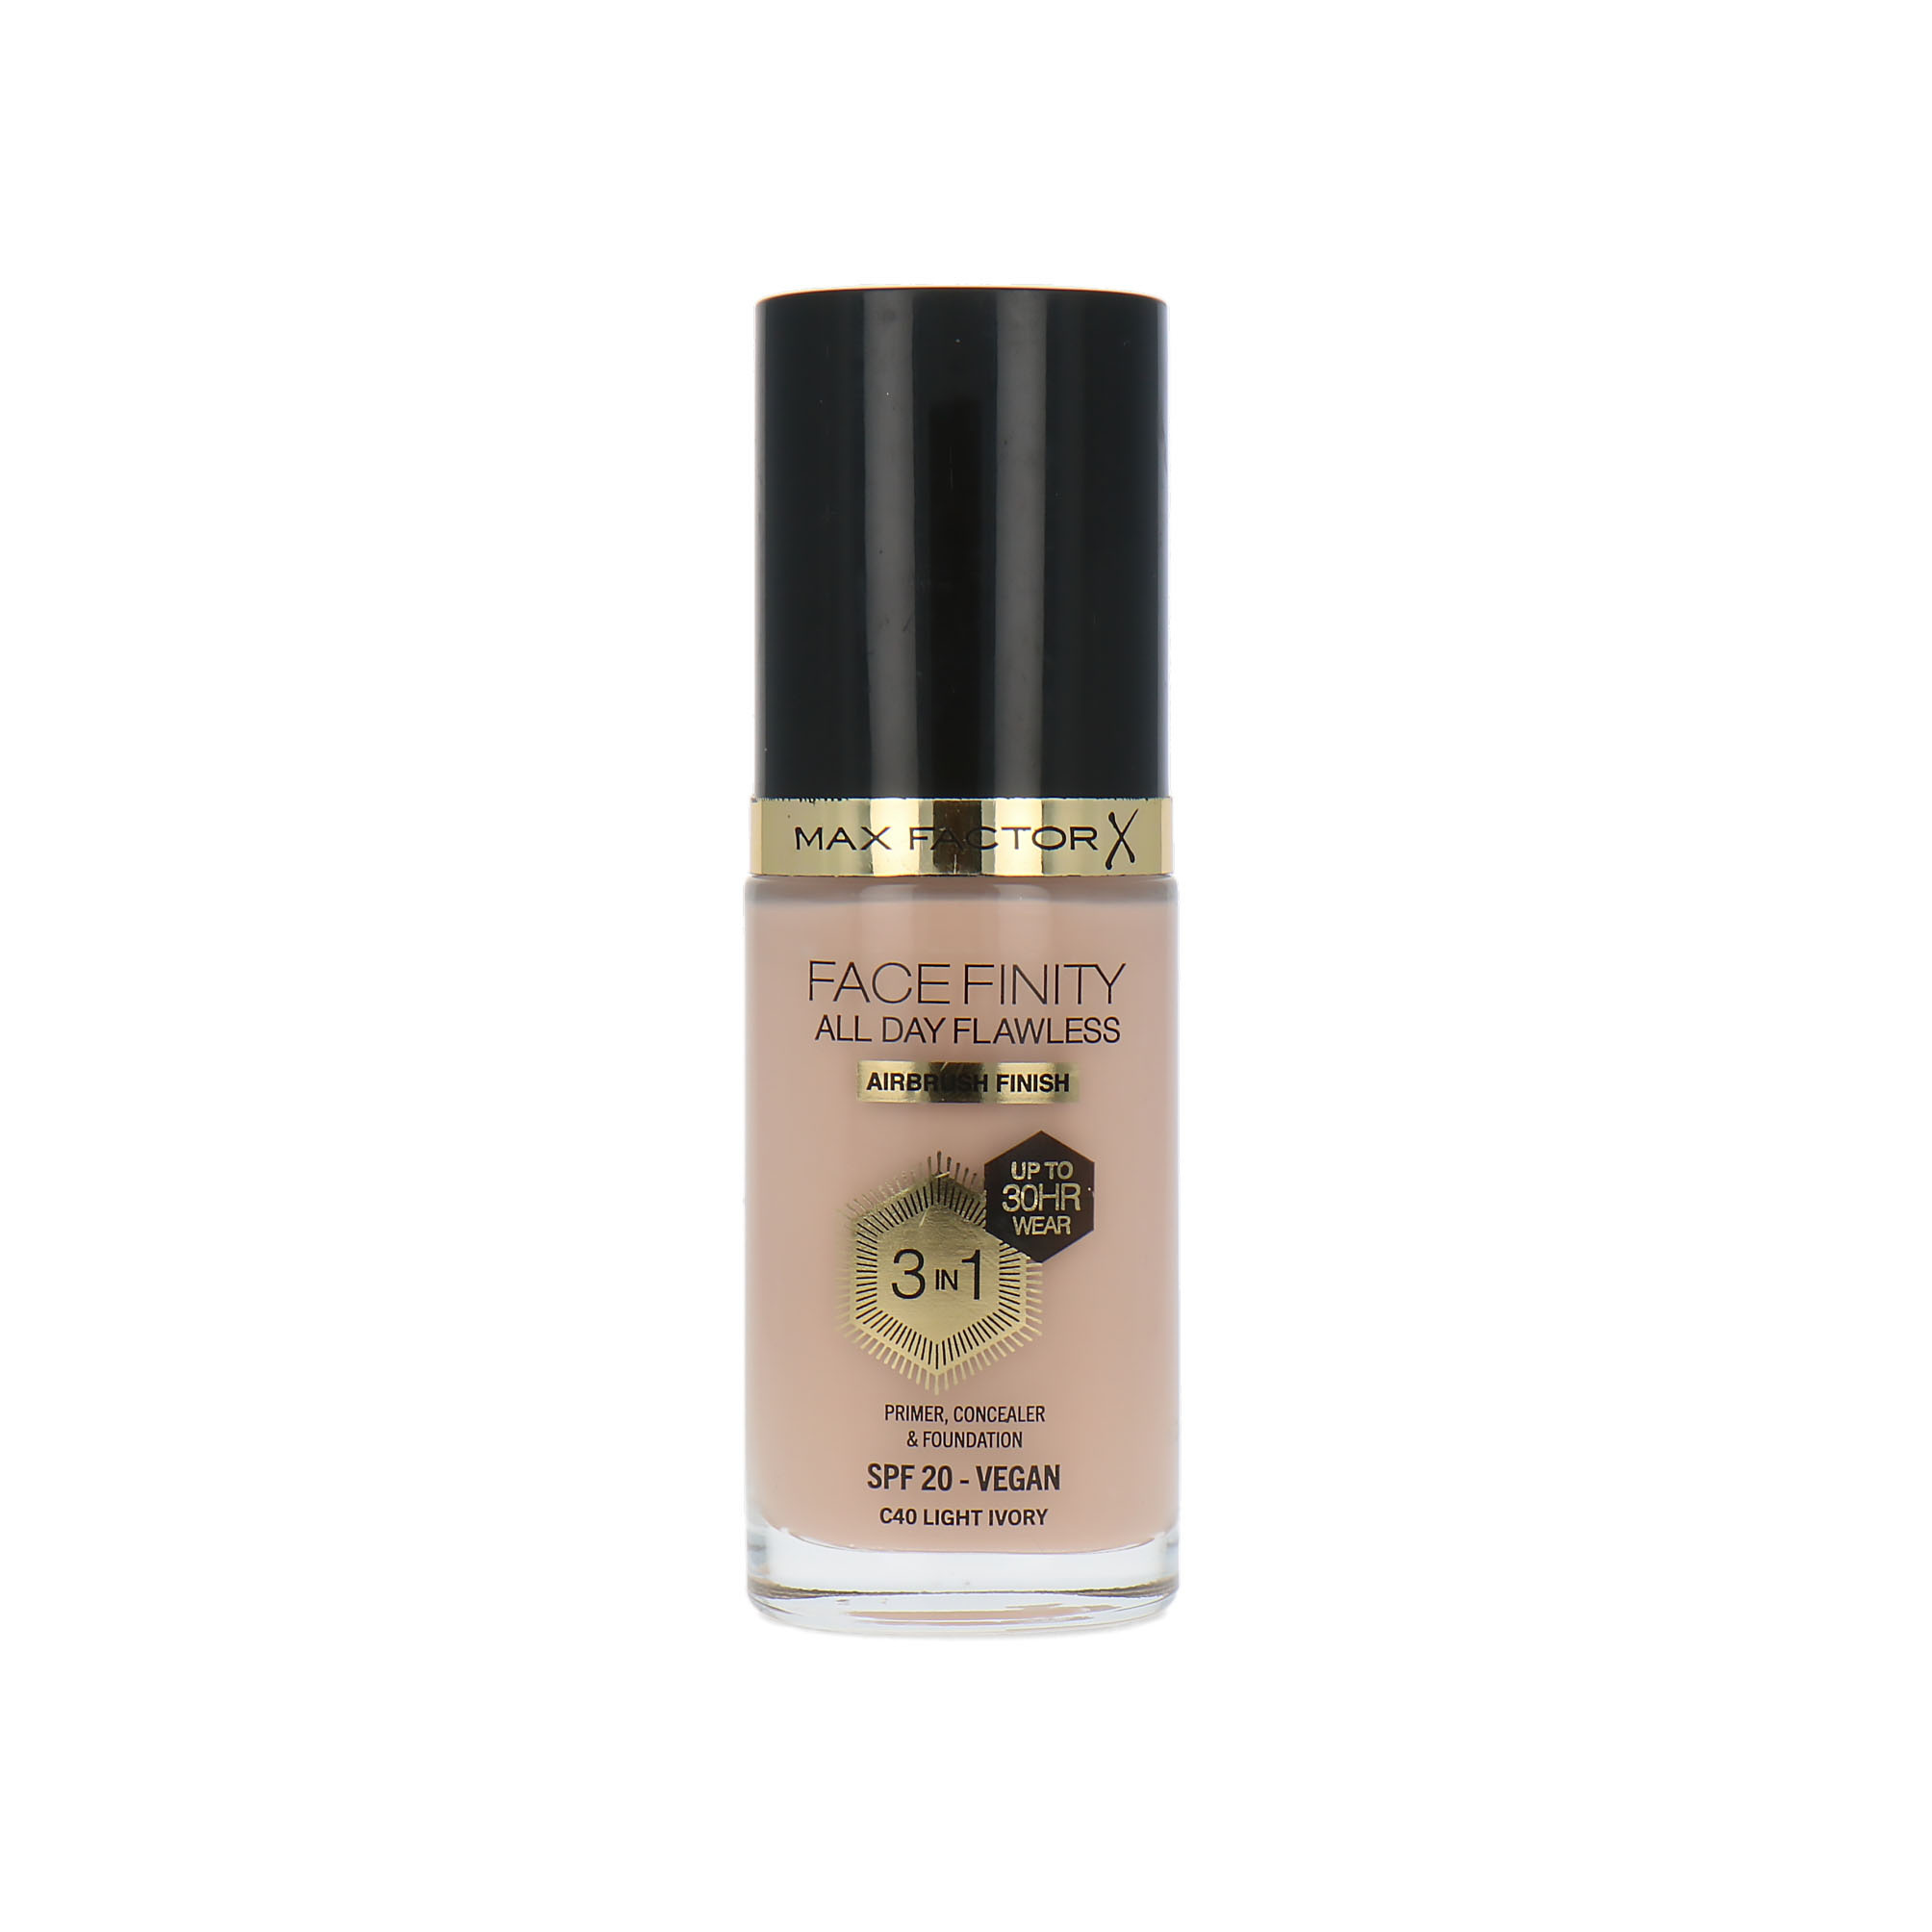 Max Factor Facefinity All Day Flawless 3 in 1 30H Airbrush Finish Fond de teint - C40 Light Ivory